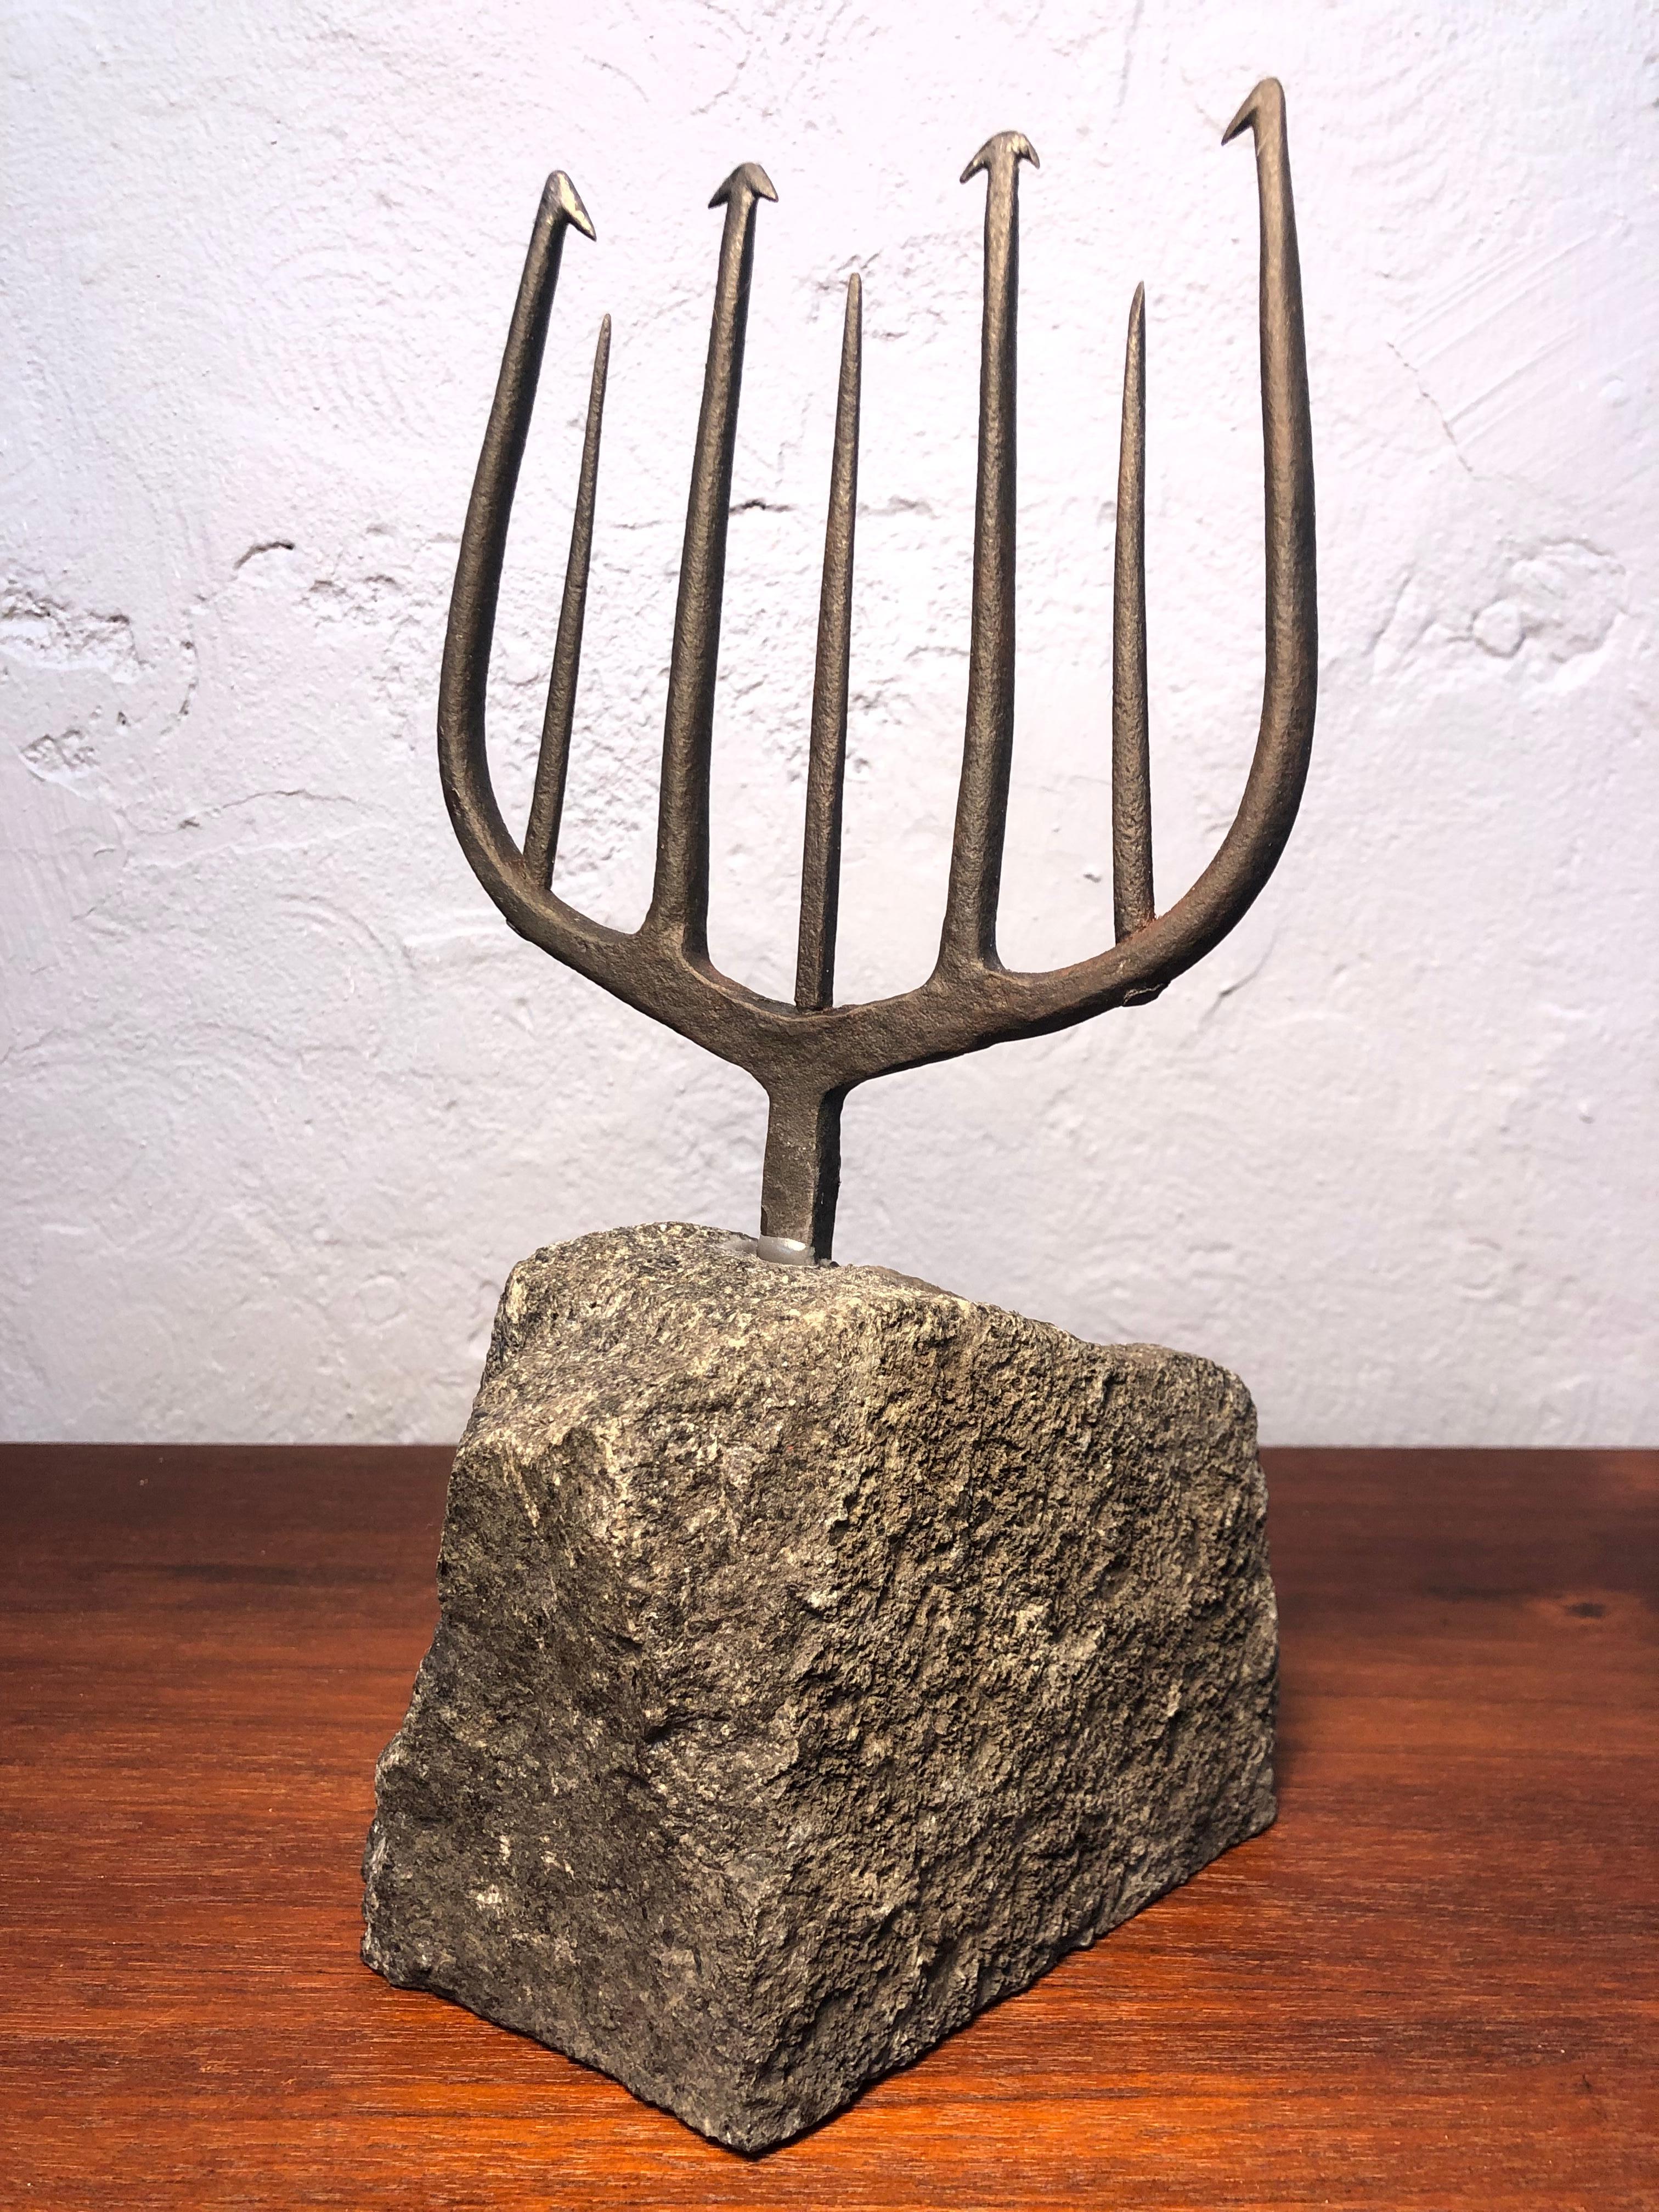 Hand-Crafted Antique Wrought Iron Eel Fork Mounted on to Basalt Rock For Sale